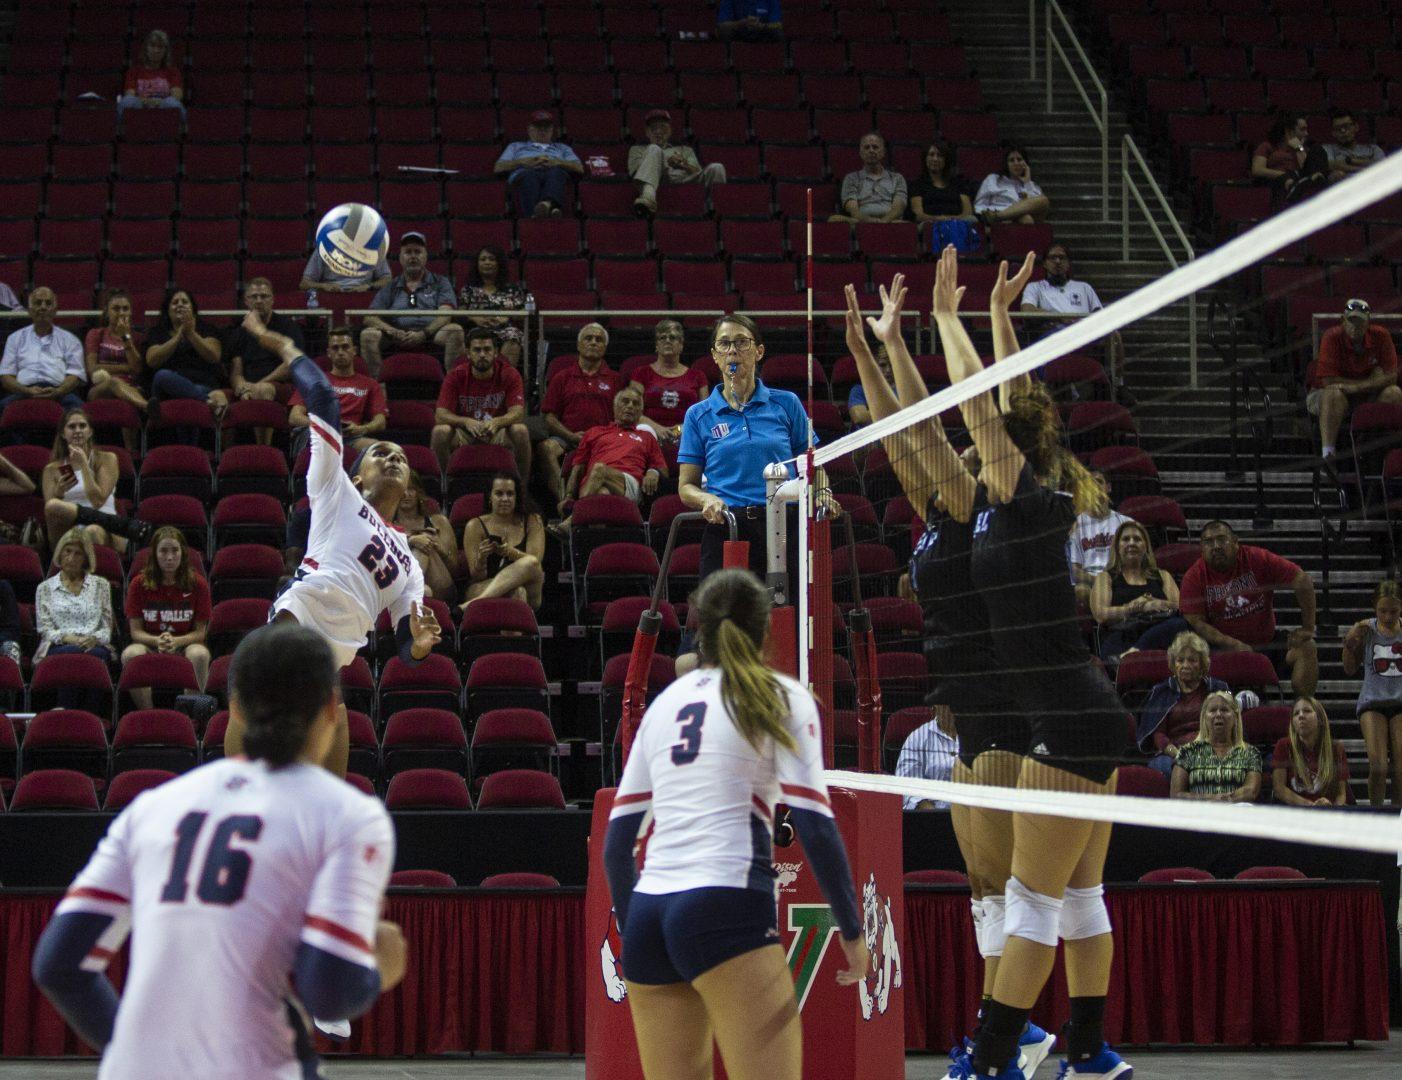 Outside hitter Amilya Thompson of Fresno State spikes the ball in front of her opponents during the Fresno State Invitational at the Save Mart Center on Thursday, Sept. 5, 2019. (Larry Valenzuela/The Collegian)